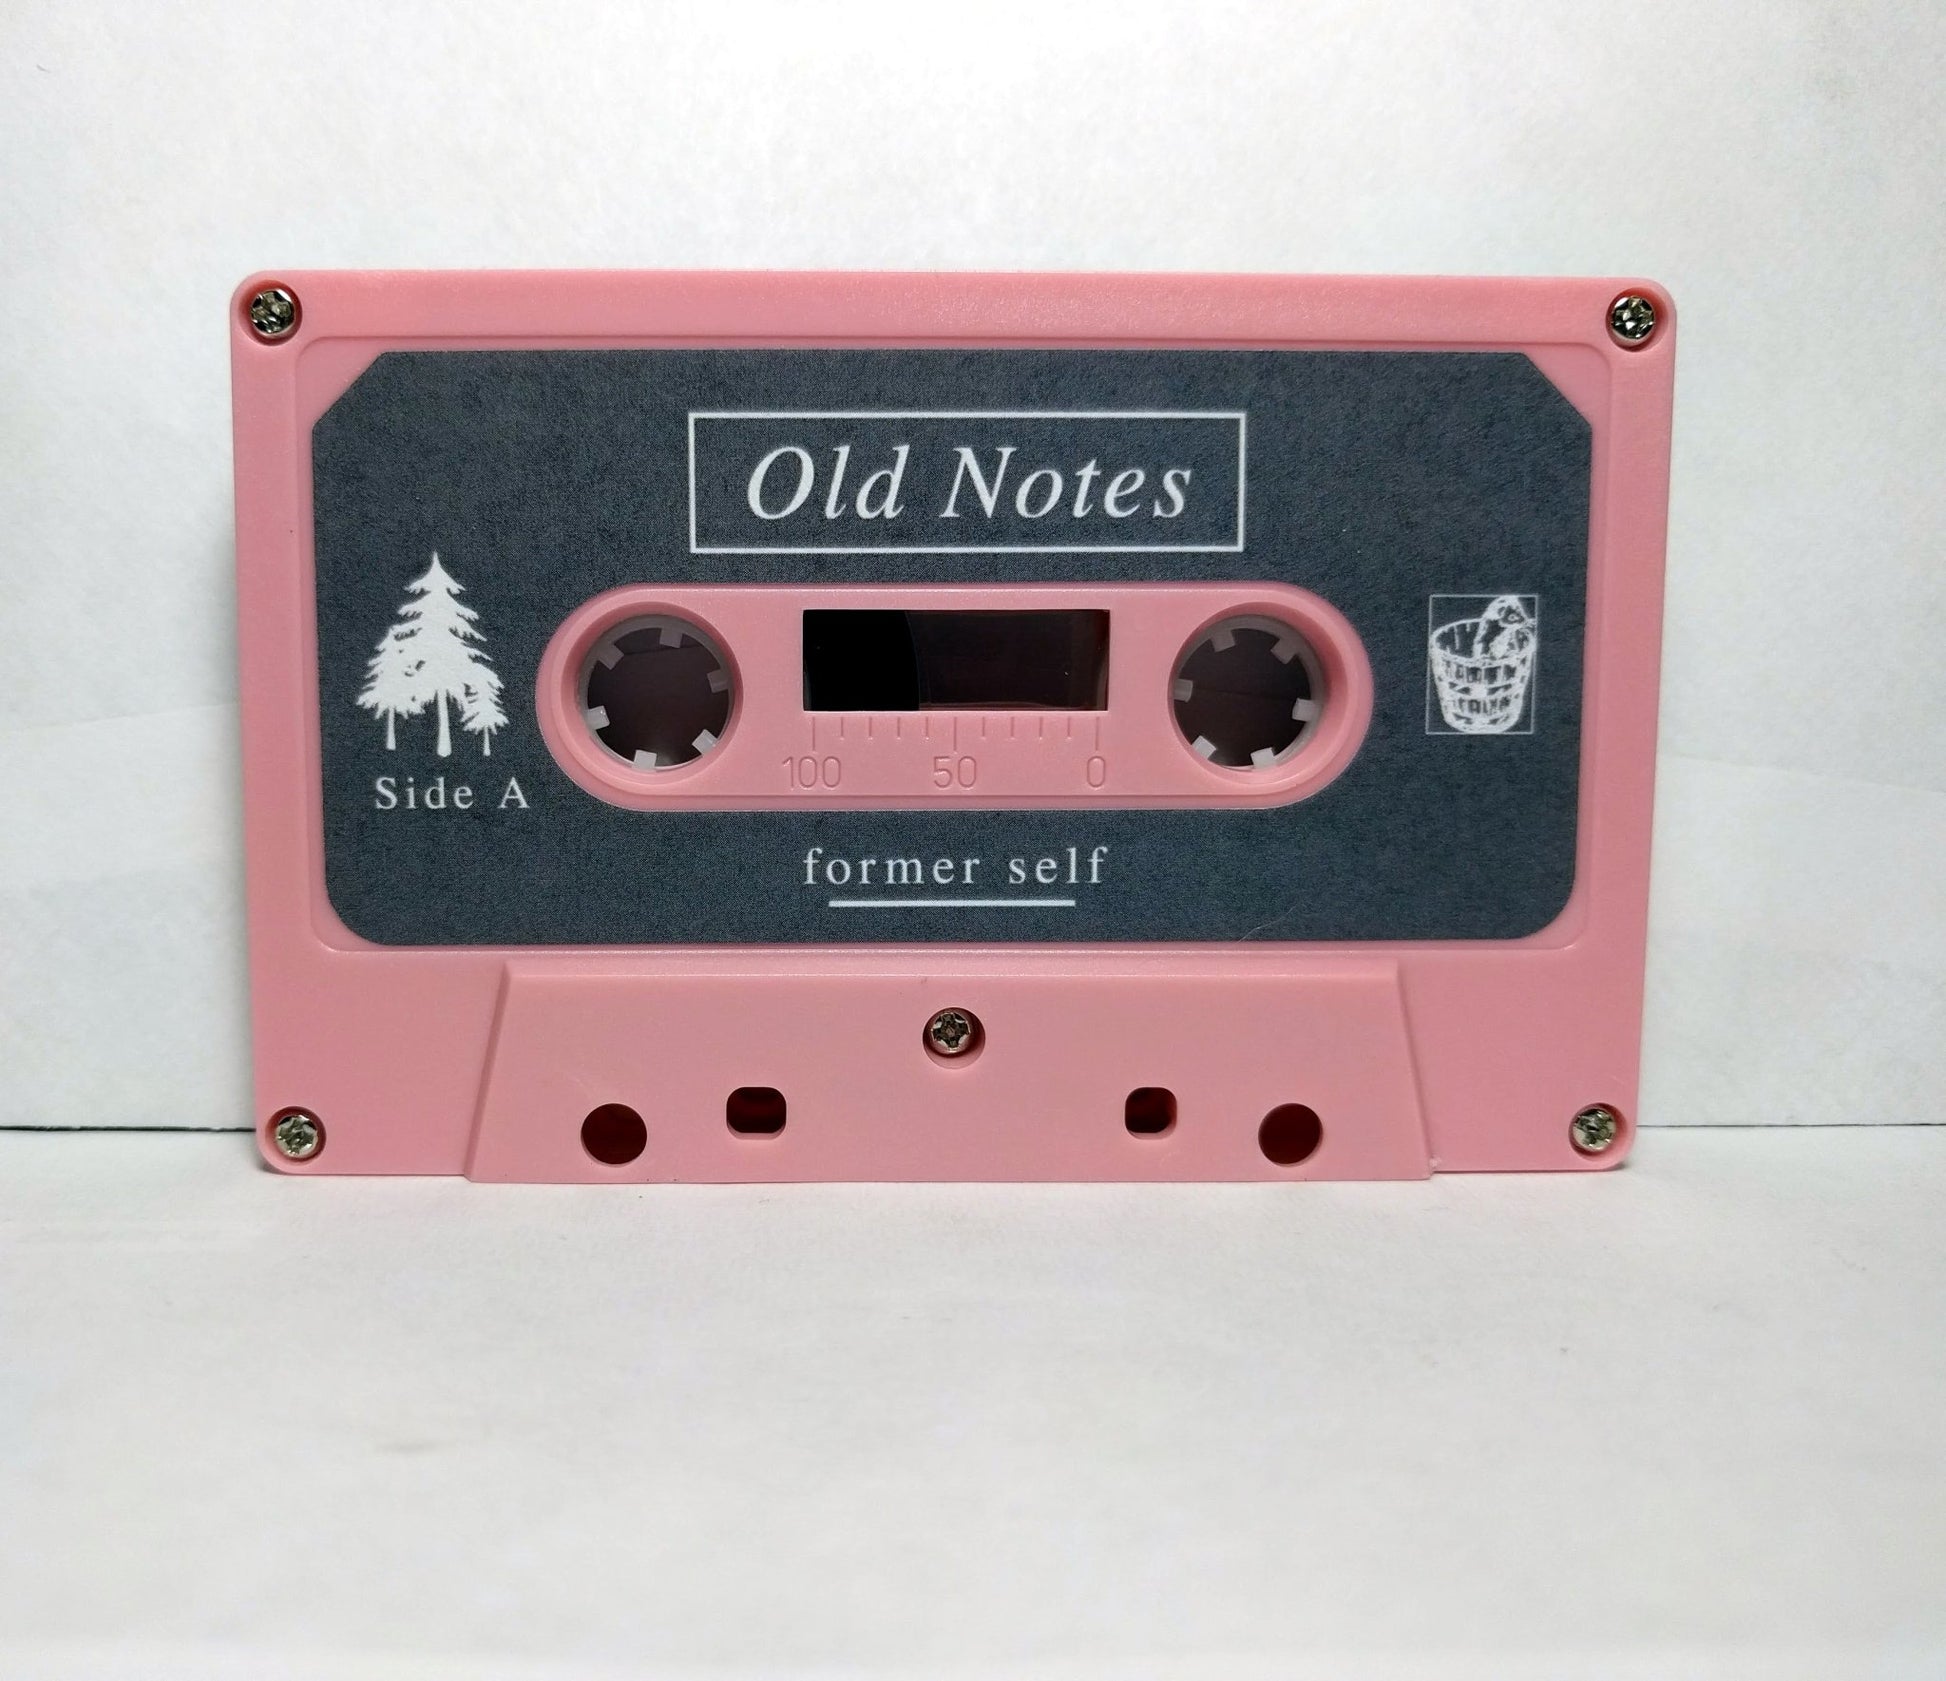 Old Notes – "Former Self" - Acrobat Unstable Records